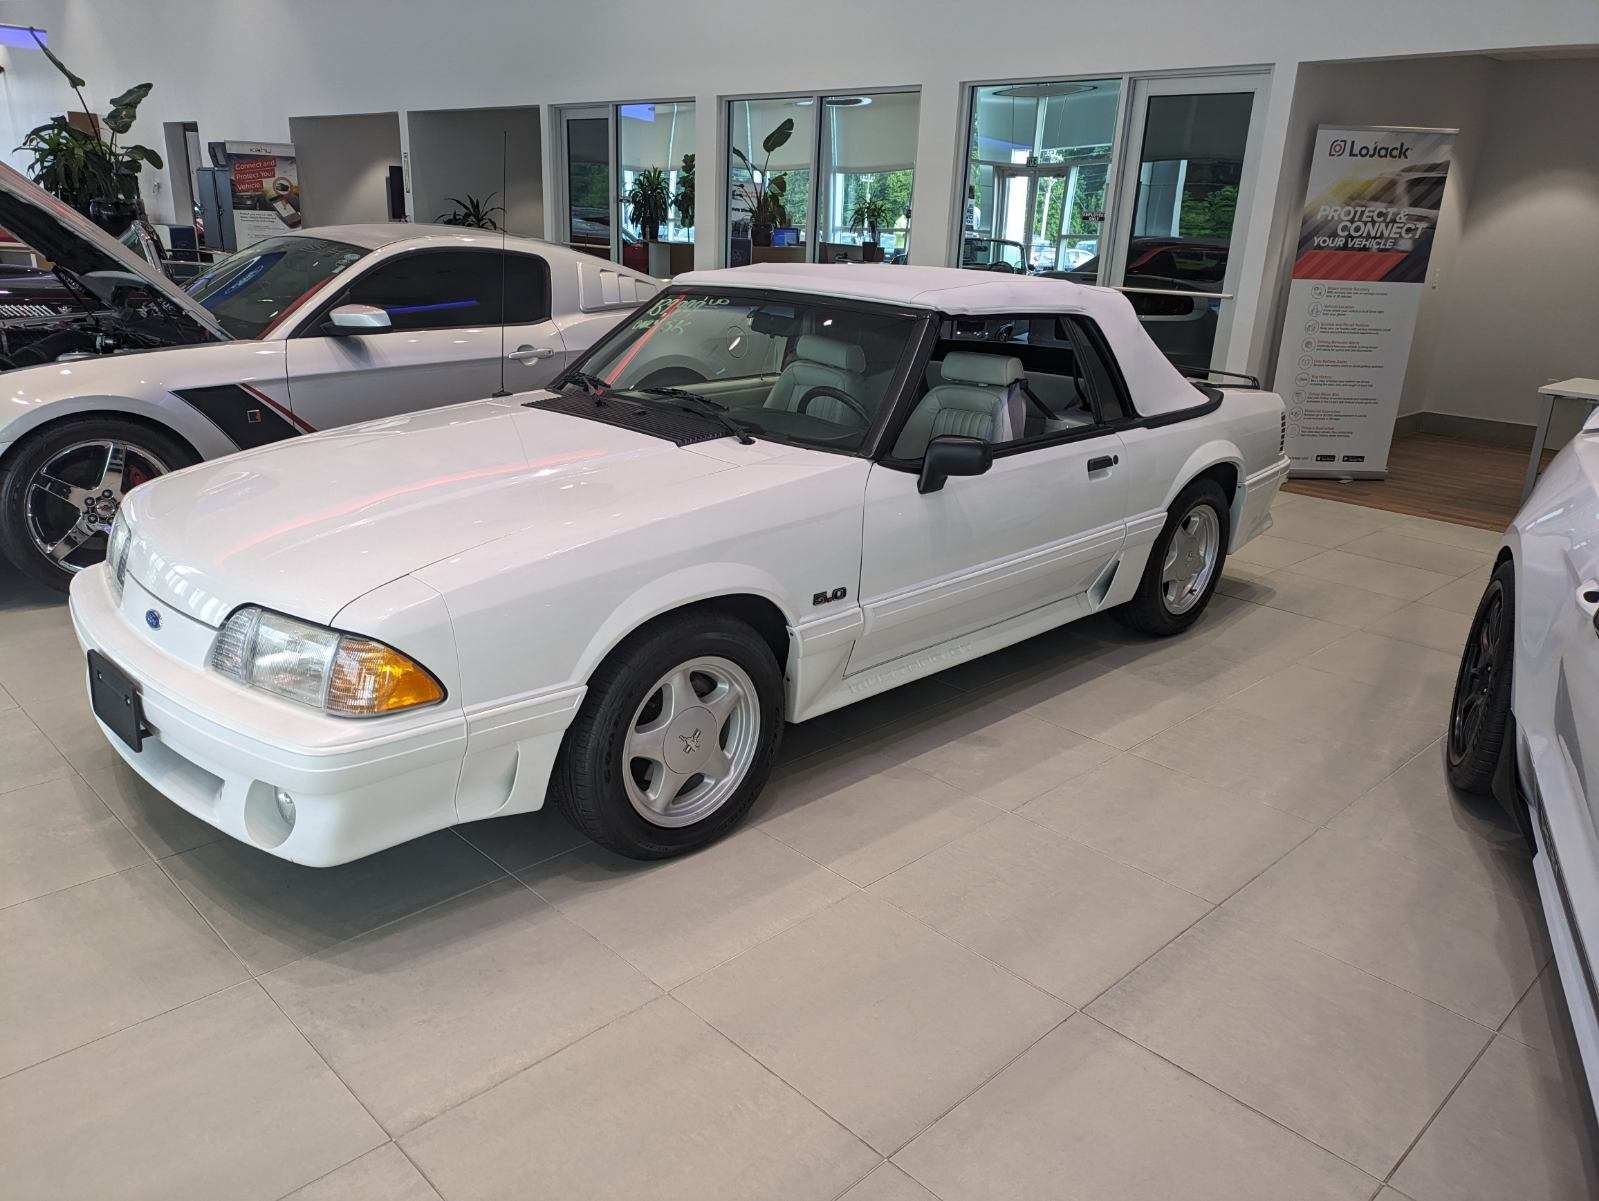 S650 Mustang Check out these older mustangs at our local dealer. I was looking at these the other day image000004